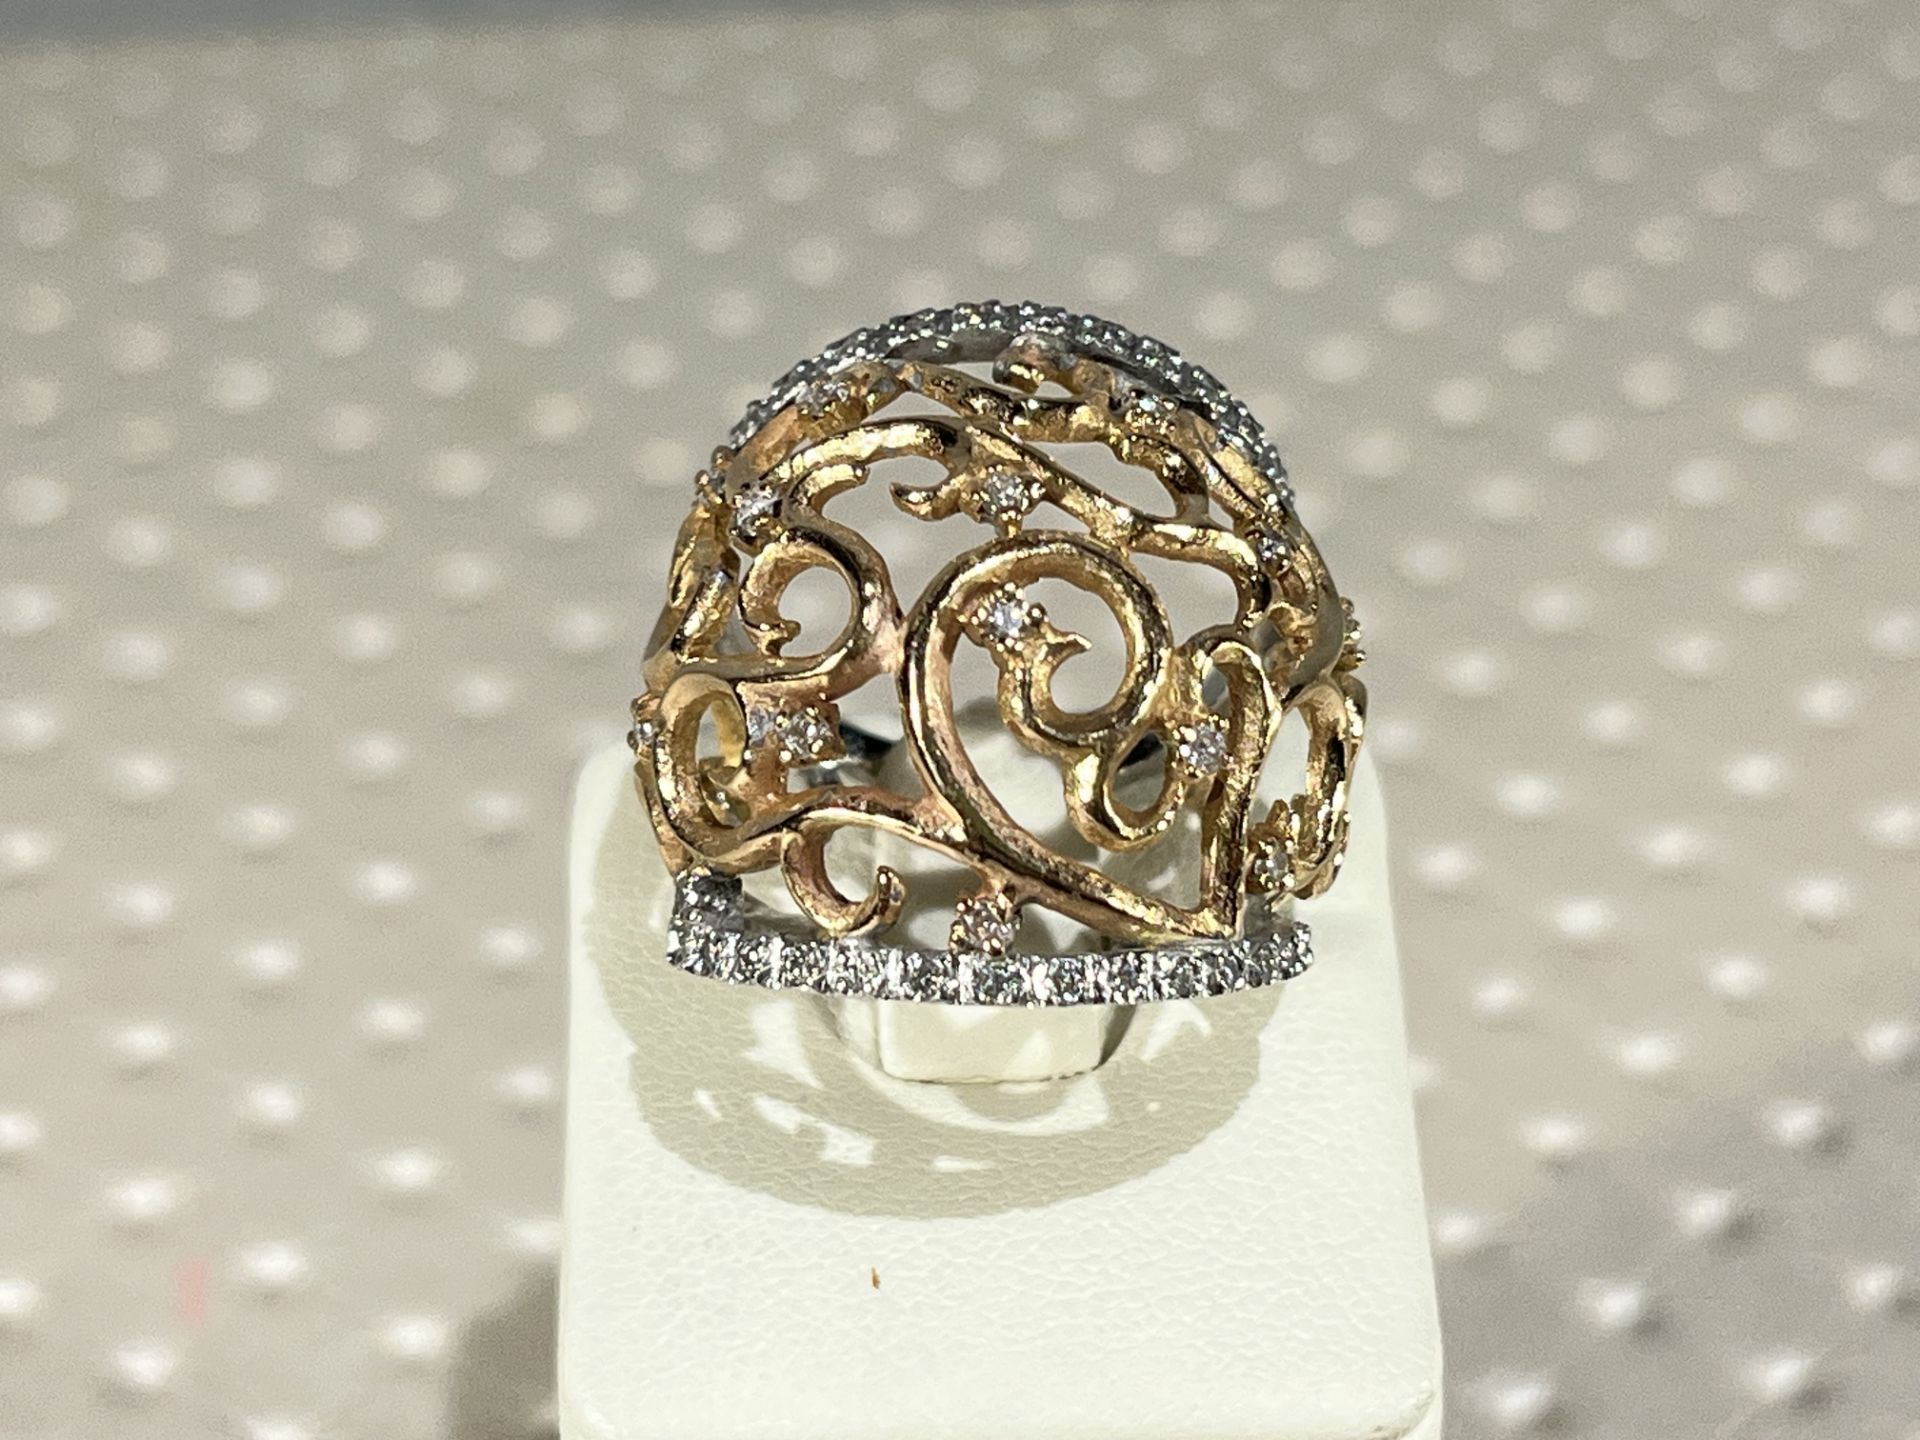 18k white and rose GOLD ring - Brilliant cut diamonds 0.60 ct - Weight: 11.7 gr - Image 2 of 4